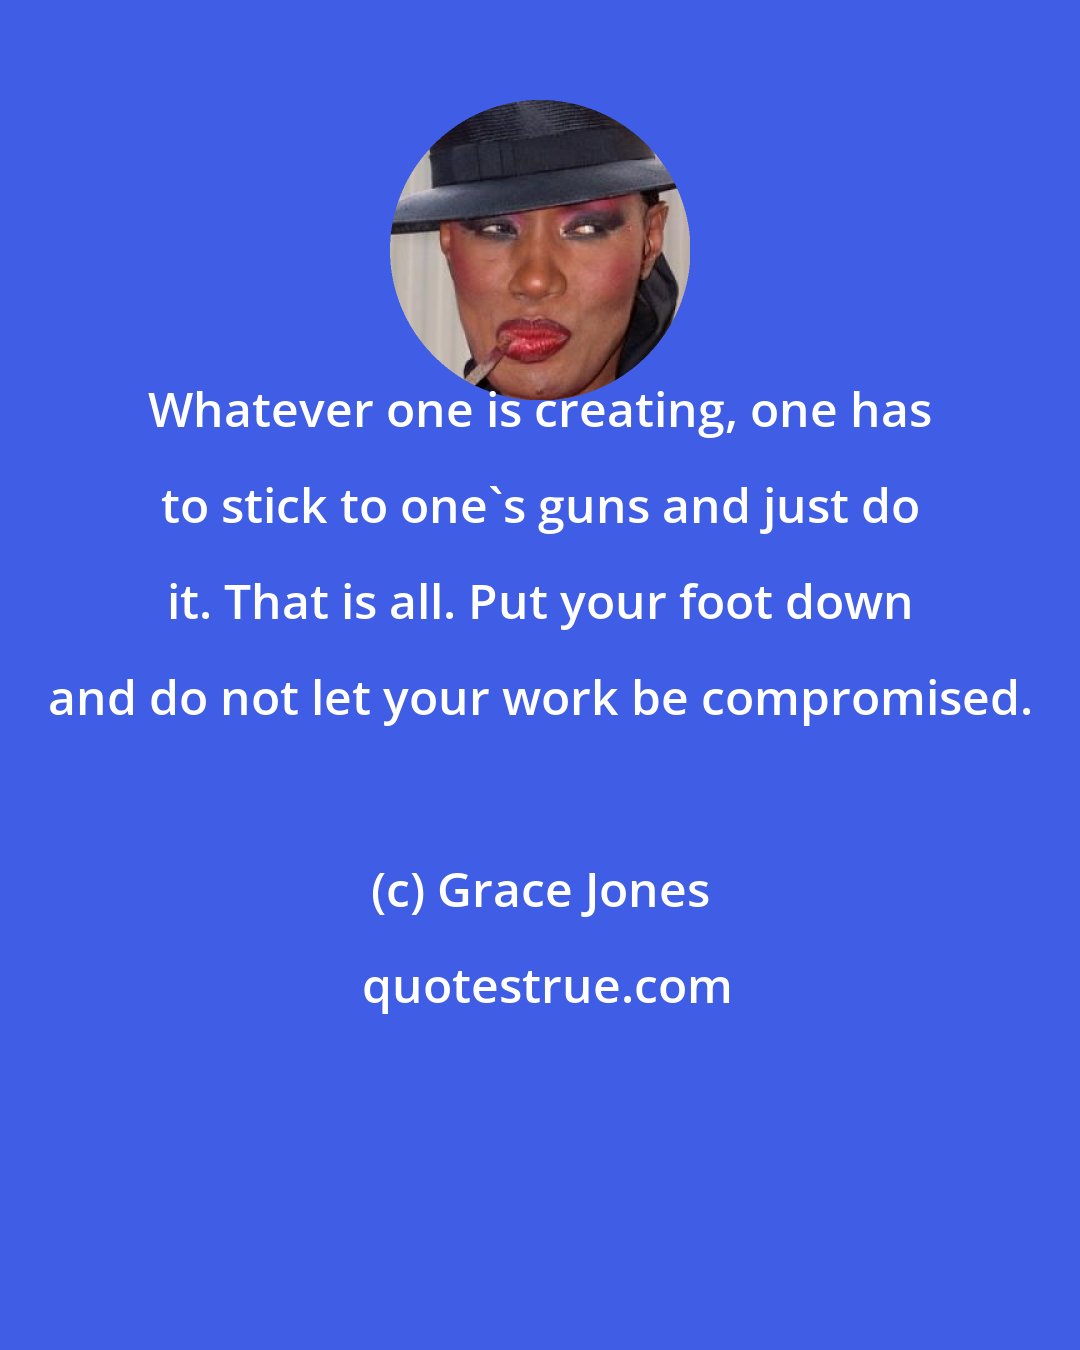 Grace Jones: Whatever one is creating, one has to stick to one's guns and just do it. That is all. Put your foot down and do not let your work be compromised.